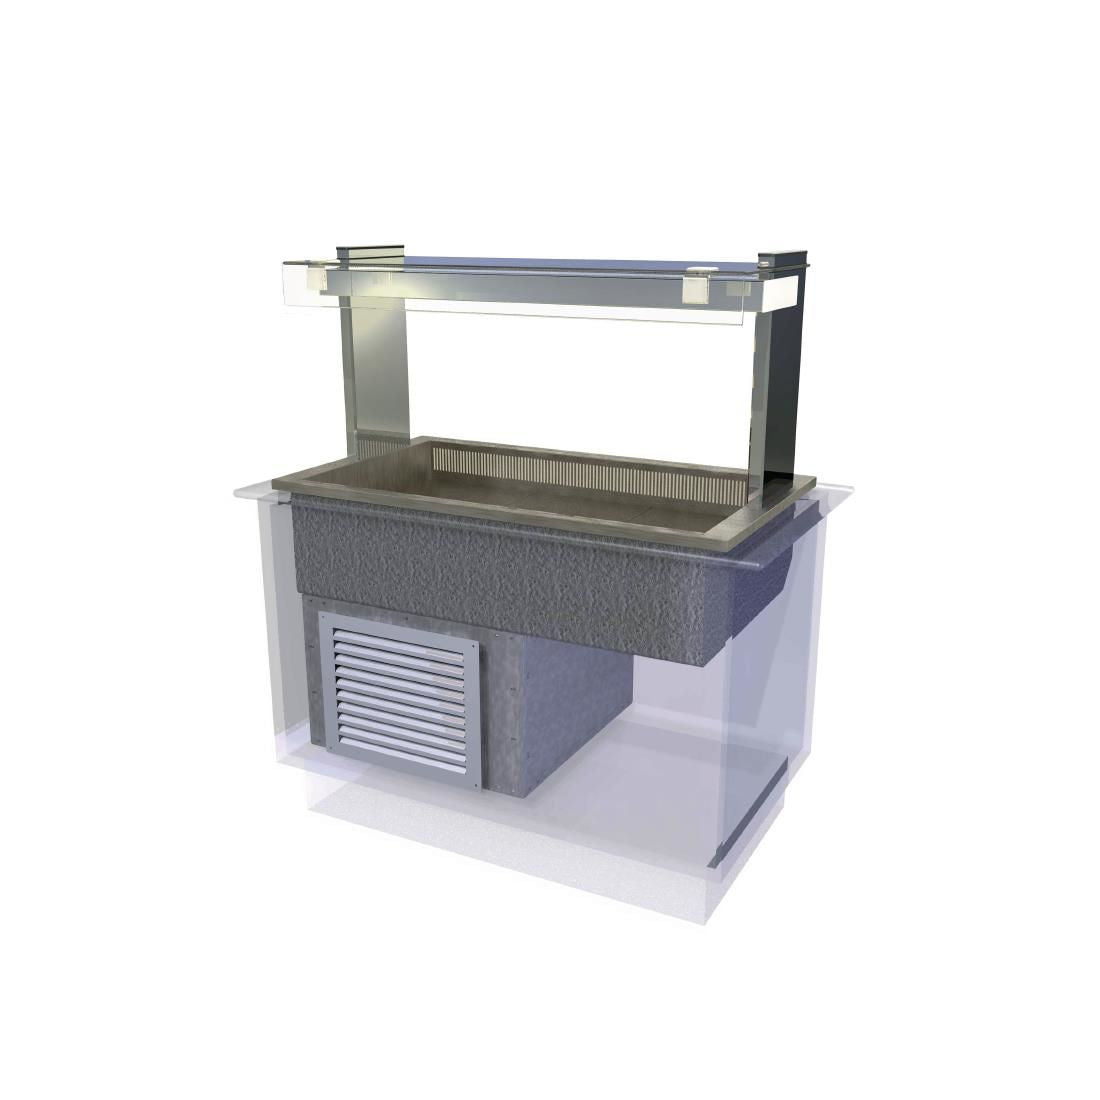 CW632 Kubus Drop In Cold Well Self Service 1175mm JD Catering Equipment Solutions Ltd